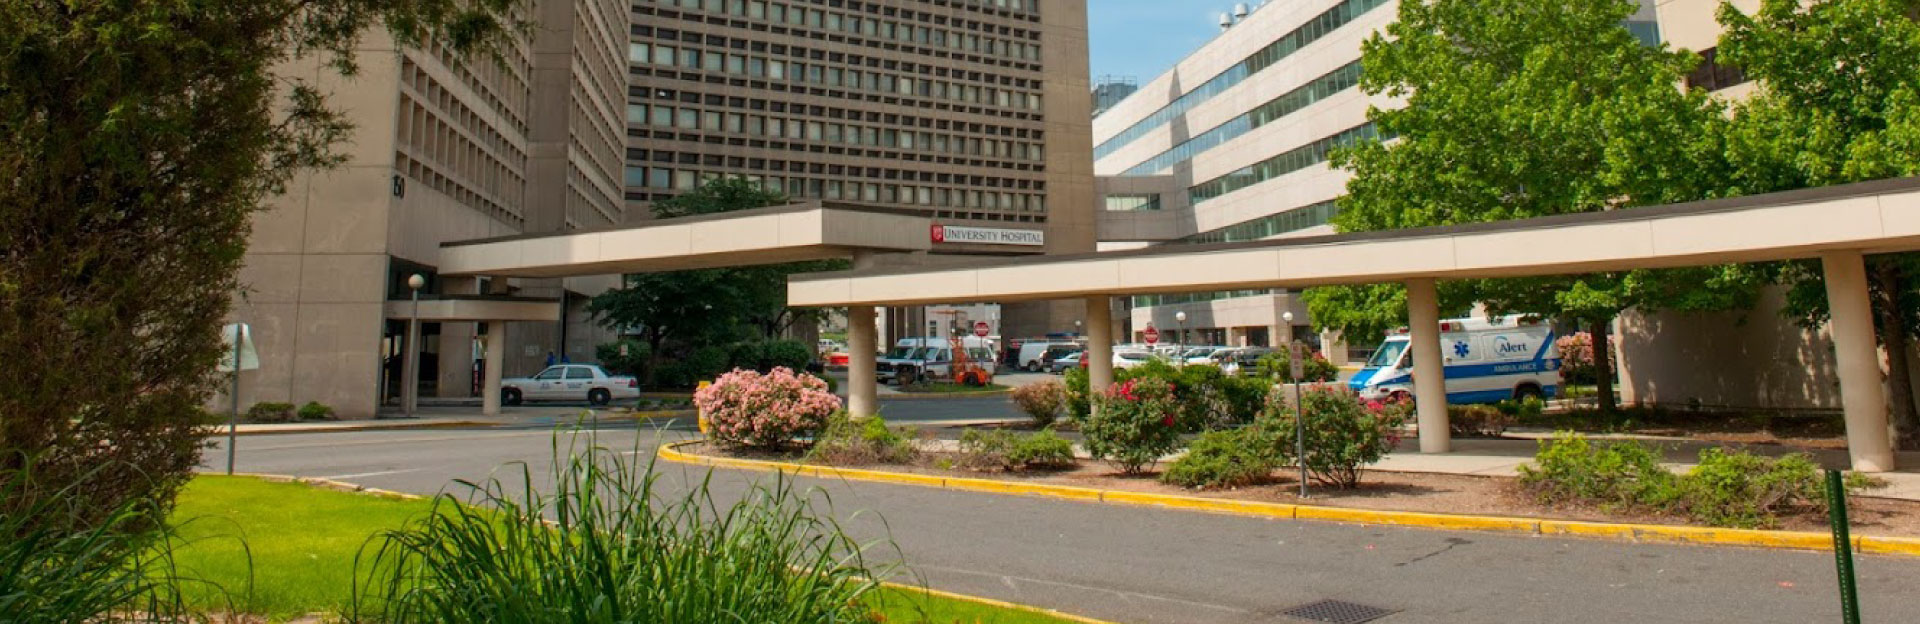 University Hospital Selects Edge as their Internet Service Provider